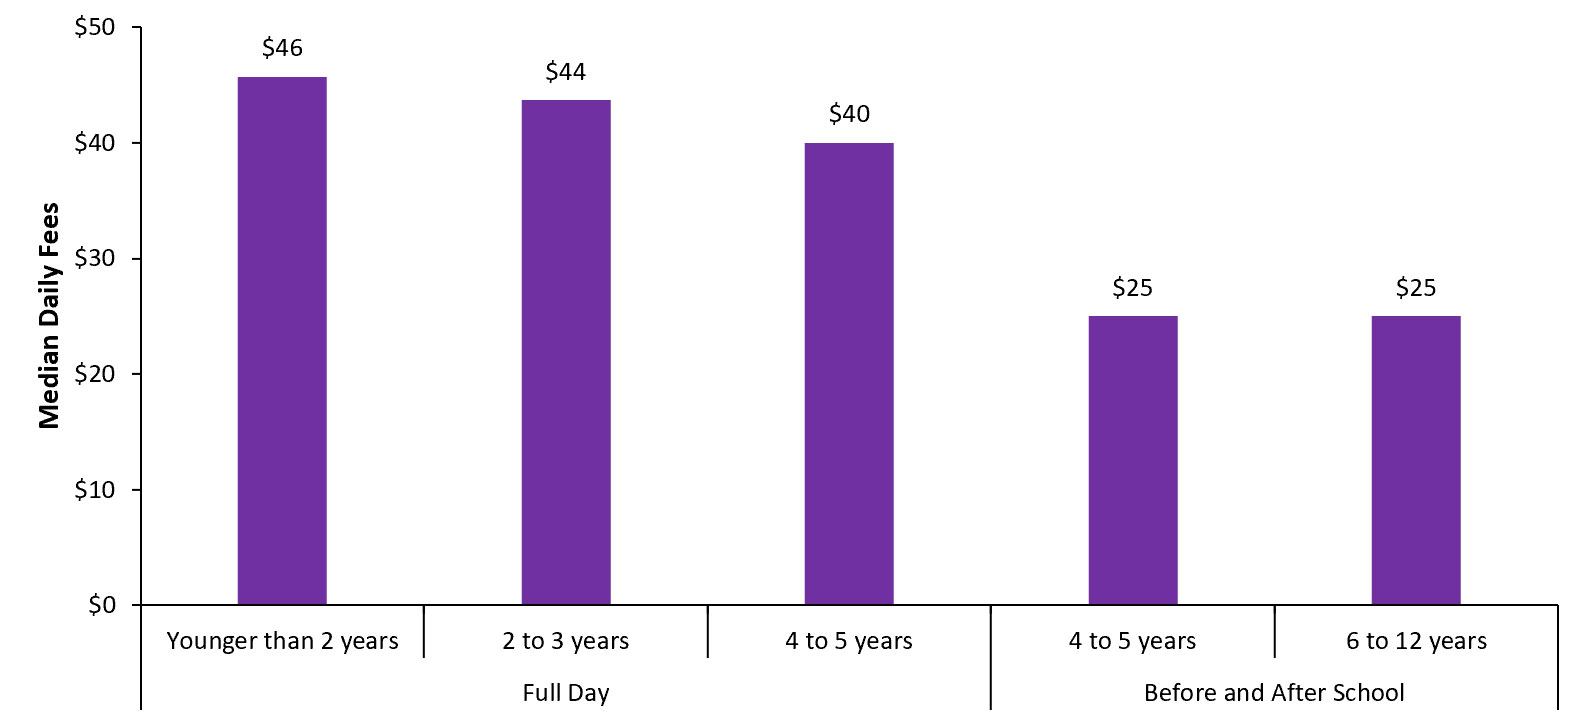 Median Daily Fees by Age Group Among Licensed Home Child Care Agencies, 2019